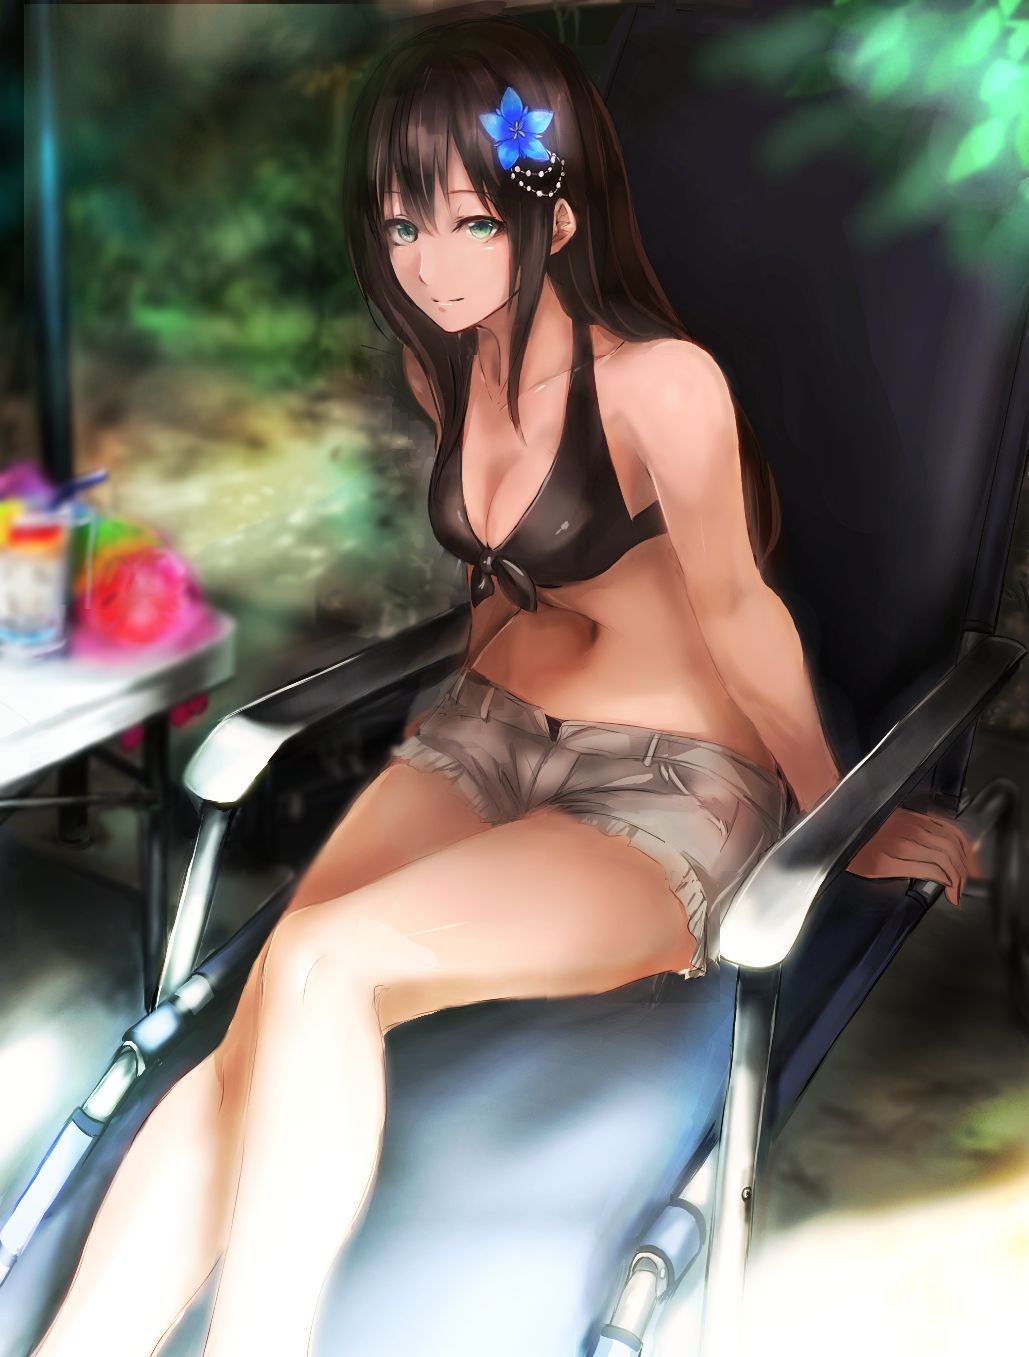 [Secondary ZIP] cool and sometimes roughing de mas Shibuya Rin-chan's image roundup 100 pieces 15